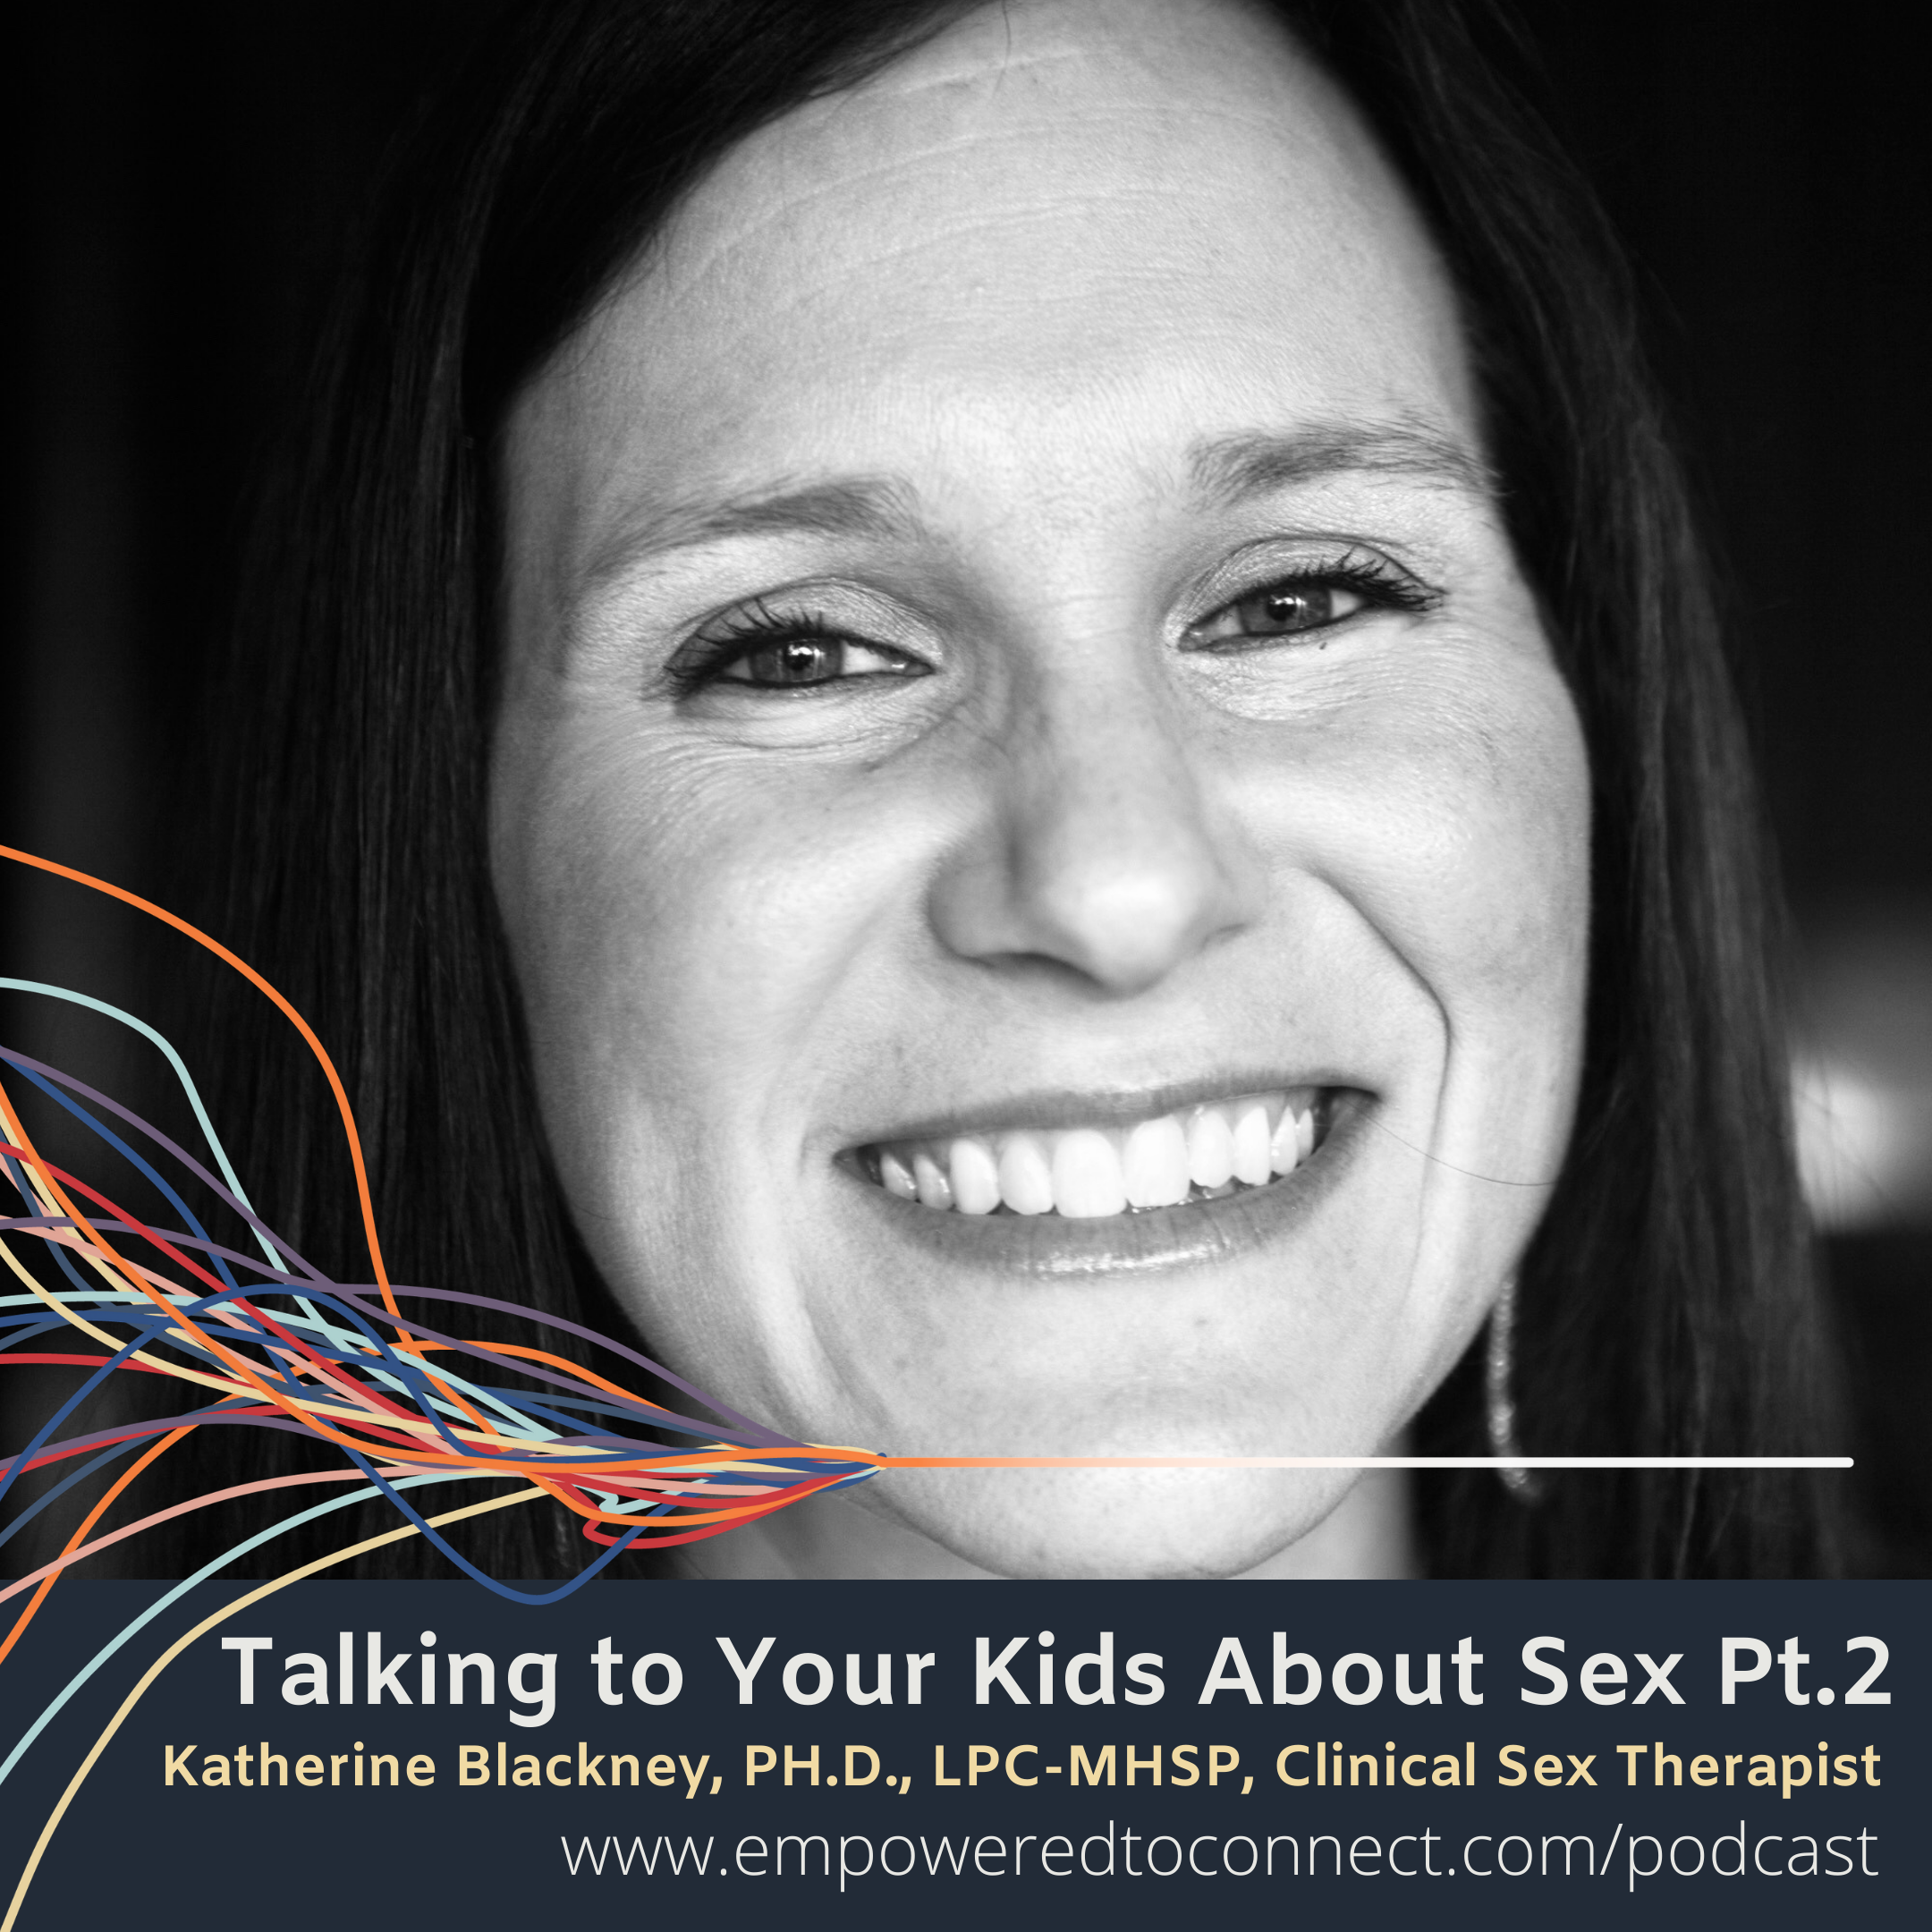 [E14] Talking to Your Kids About Sex (Pt 2) with Dr. Katherine Blackney